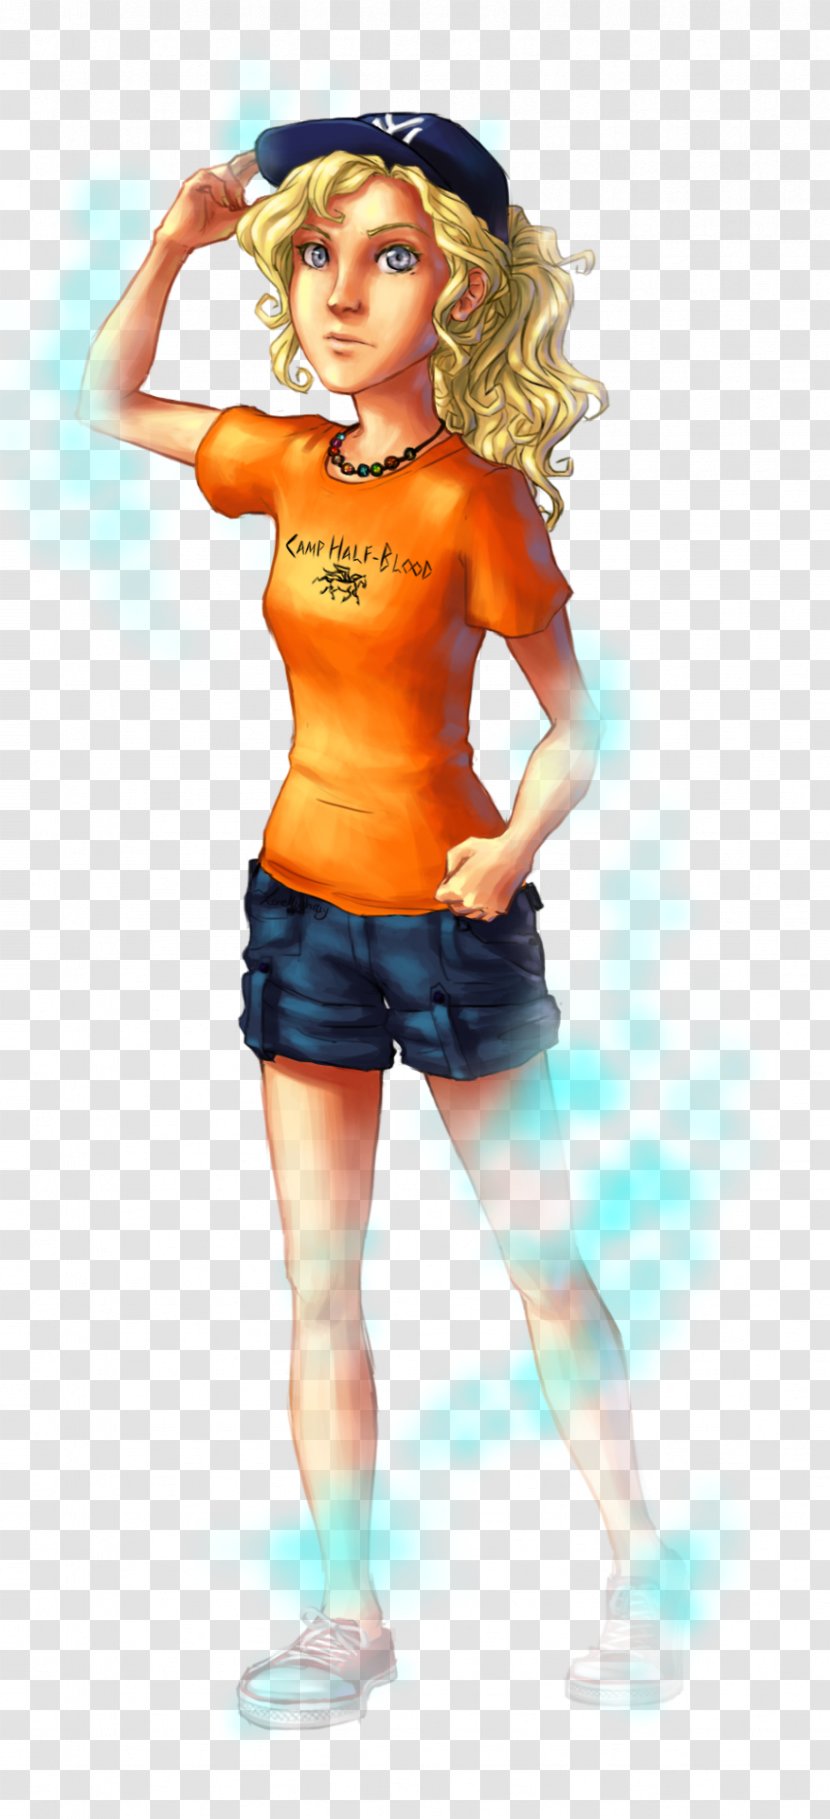 Annabeth Chase Percy Jackson & The Olympians: Lightning Thief Rick Riordan Blood Of Olympus - Watercolor - Flower Transparent PNG